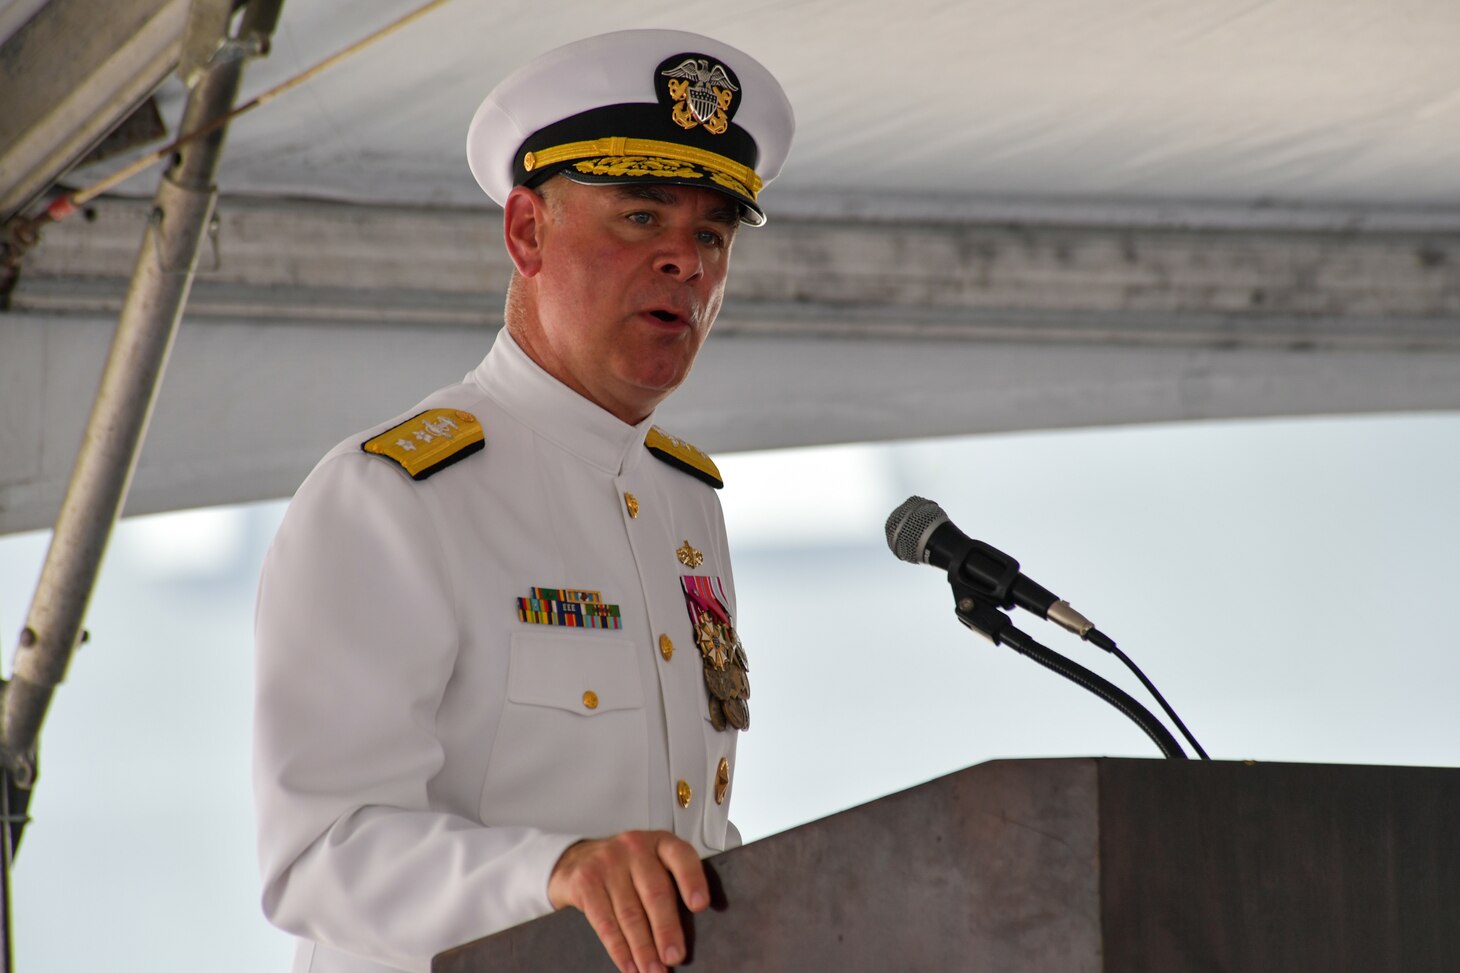 NAVAL STATION NORFOLK (Aug. 4, 2022) Rear Adm. Brendan McLane, commander, Naval Surface Force Atlantic, speaks during the guided-missile cruiser USS Vella Gulf (CG 72) decommissioning ceremony, Aug. 4, 2022. Vella Gulf was commissioned on Sept. 18, 1993 at Naval Station Norfolk. Vella Gulf is the first of five cruisers set to be decommissioned this year. (U.S. Navy photo by Mass Communication Specialist 1st Class Jacob Milham)